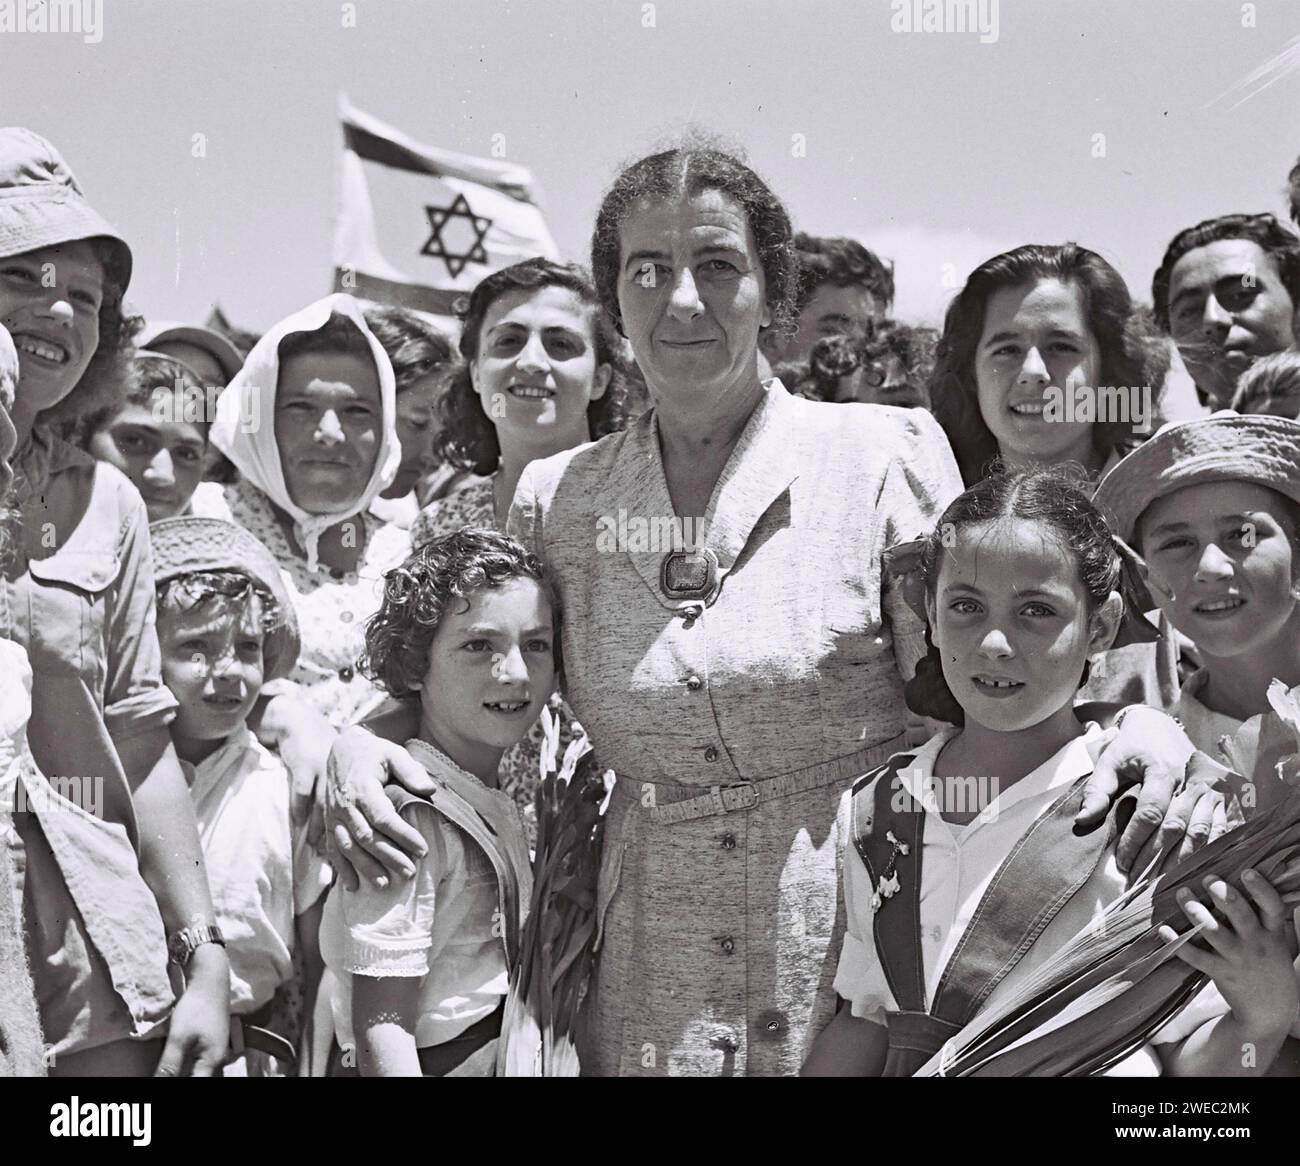 GOLDA MEIR (1898-1978) Prime Minister of Israel in 1950 with members of the Kibbutz Shefayim Stock Photo